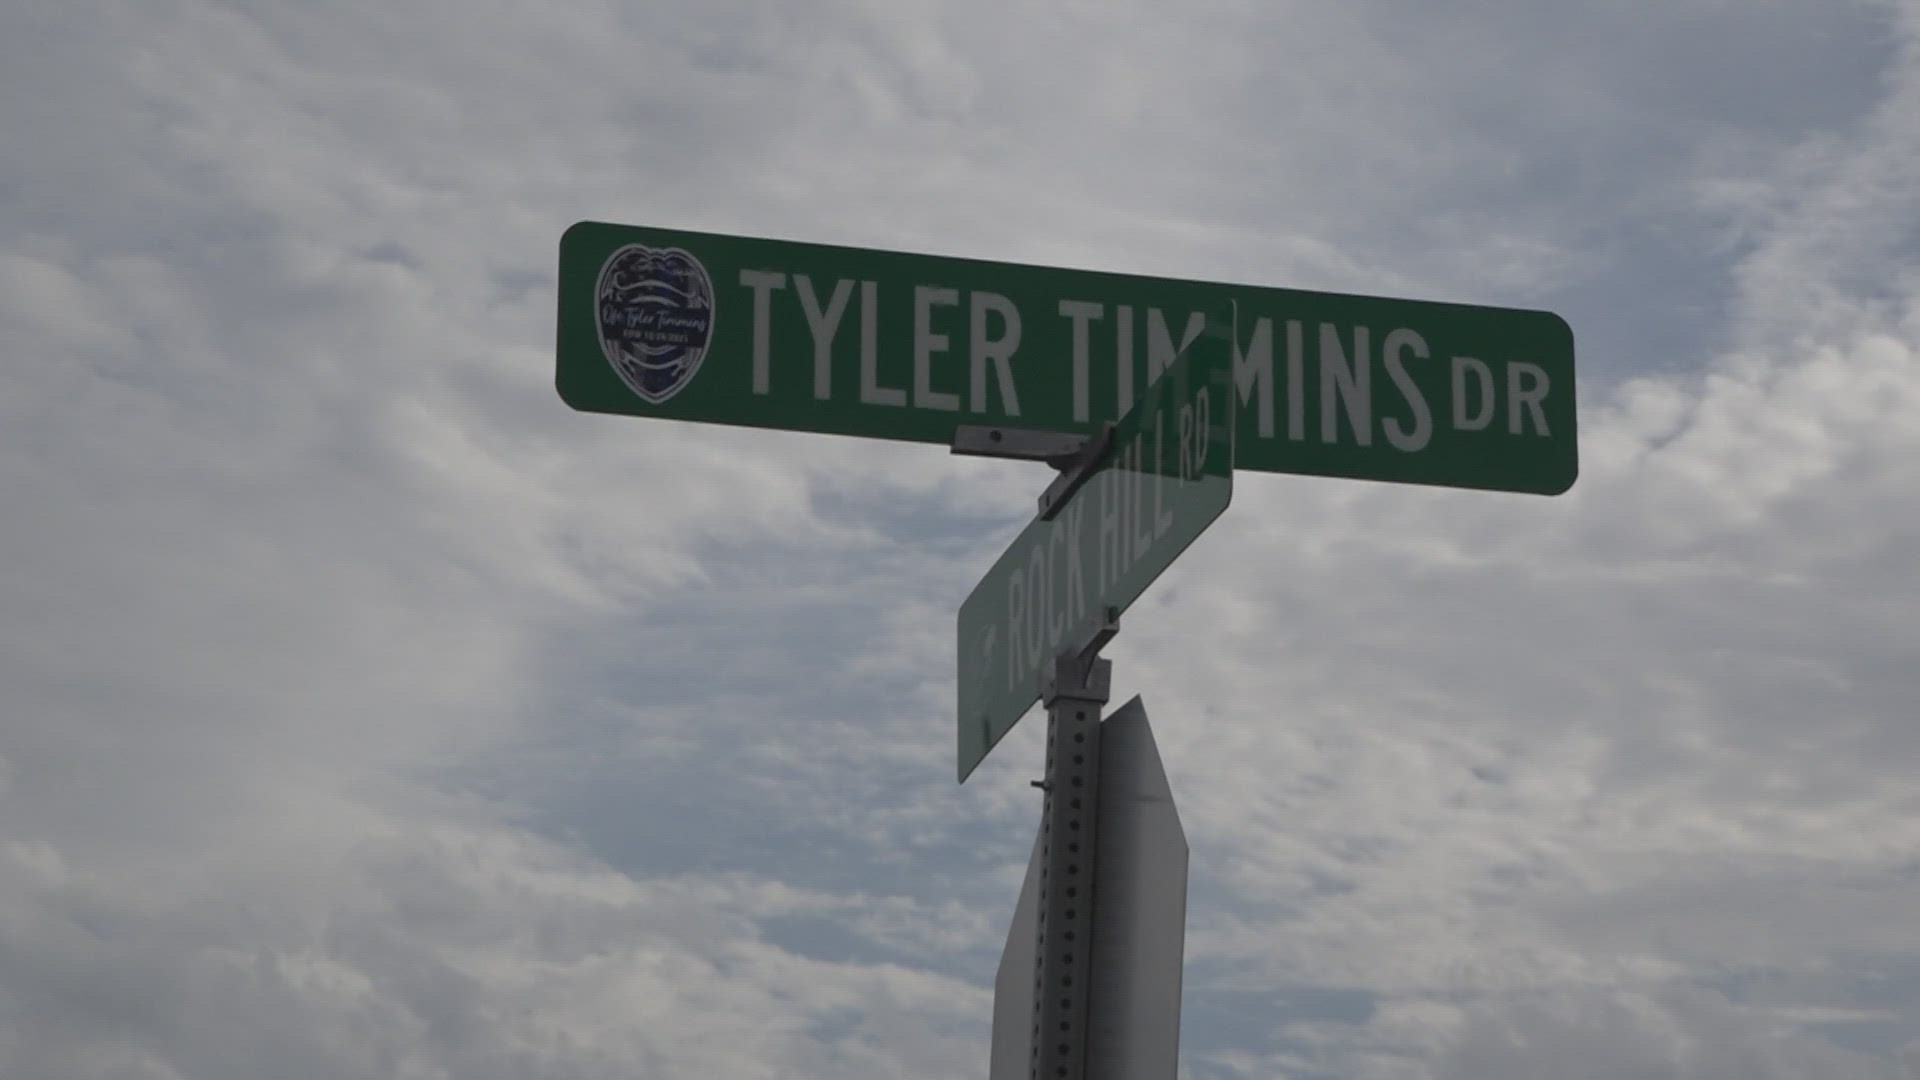 On the two-year anniversary of his death, Wood River police Officer Tyler Timmons was honored. Timmons was fatally shot while approaching a stolen vehicle.